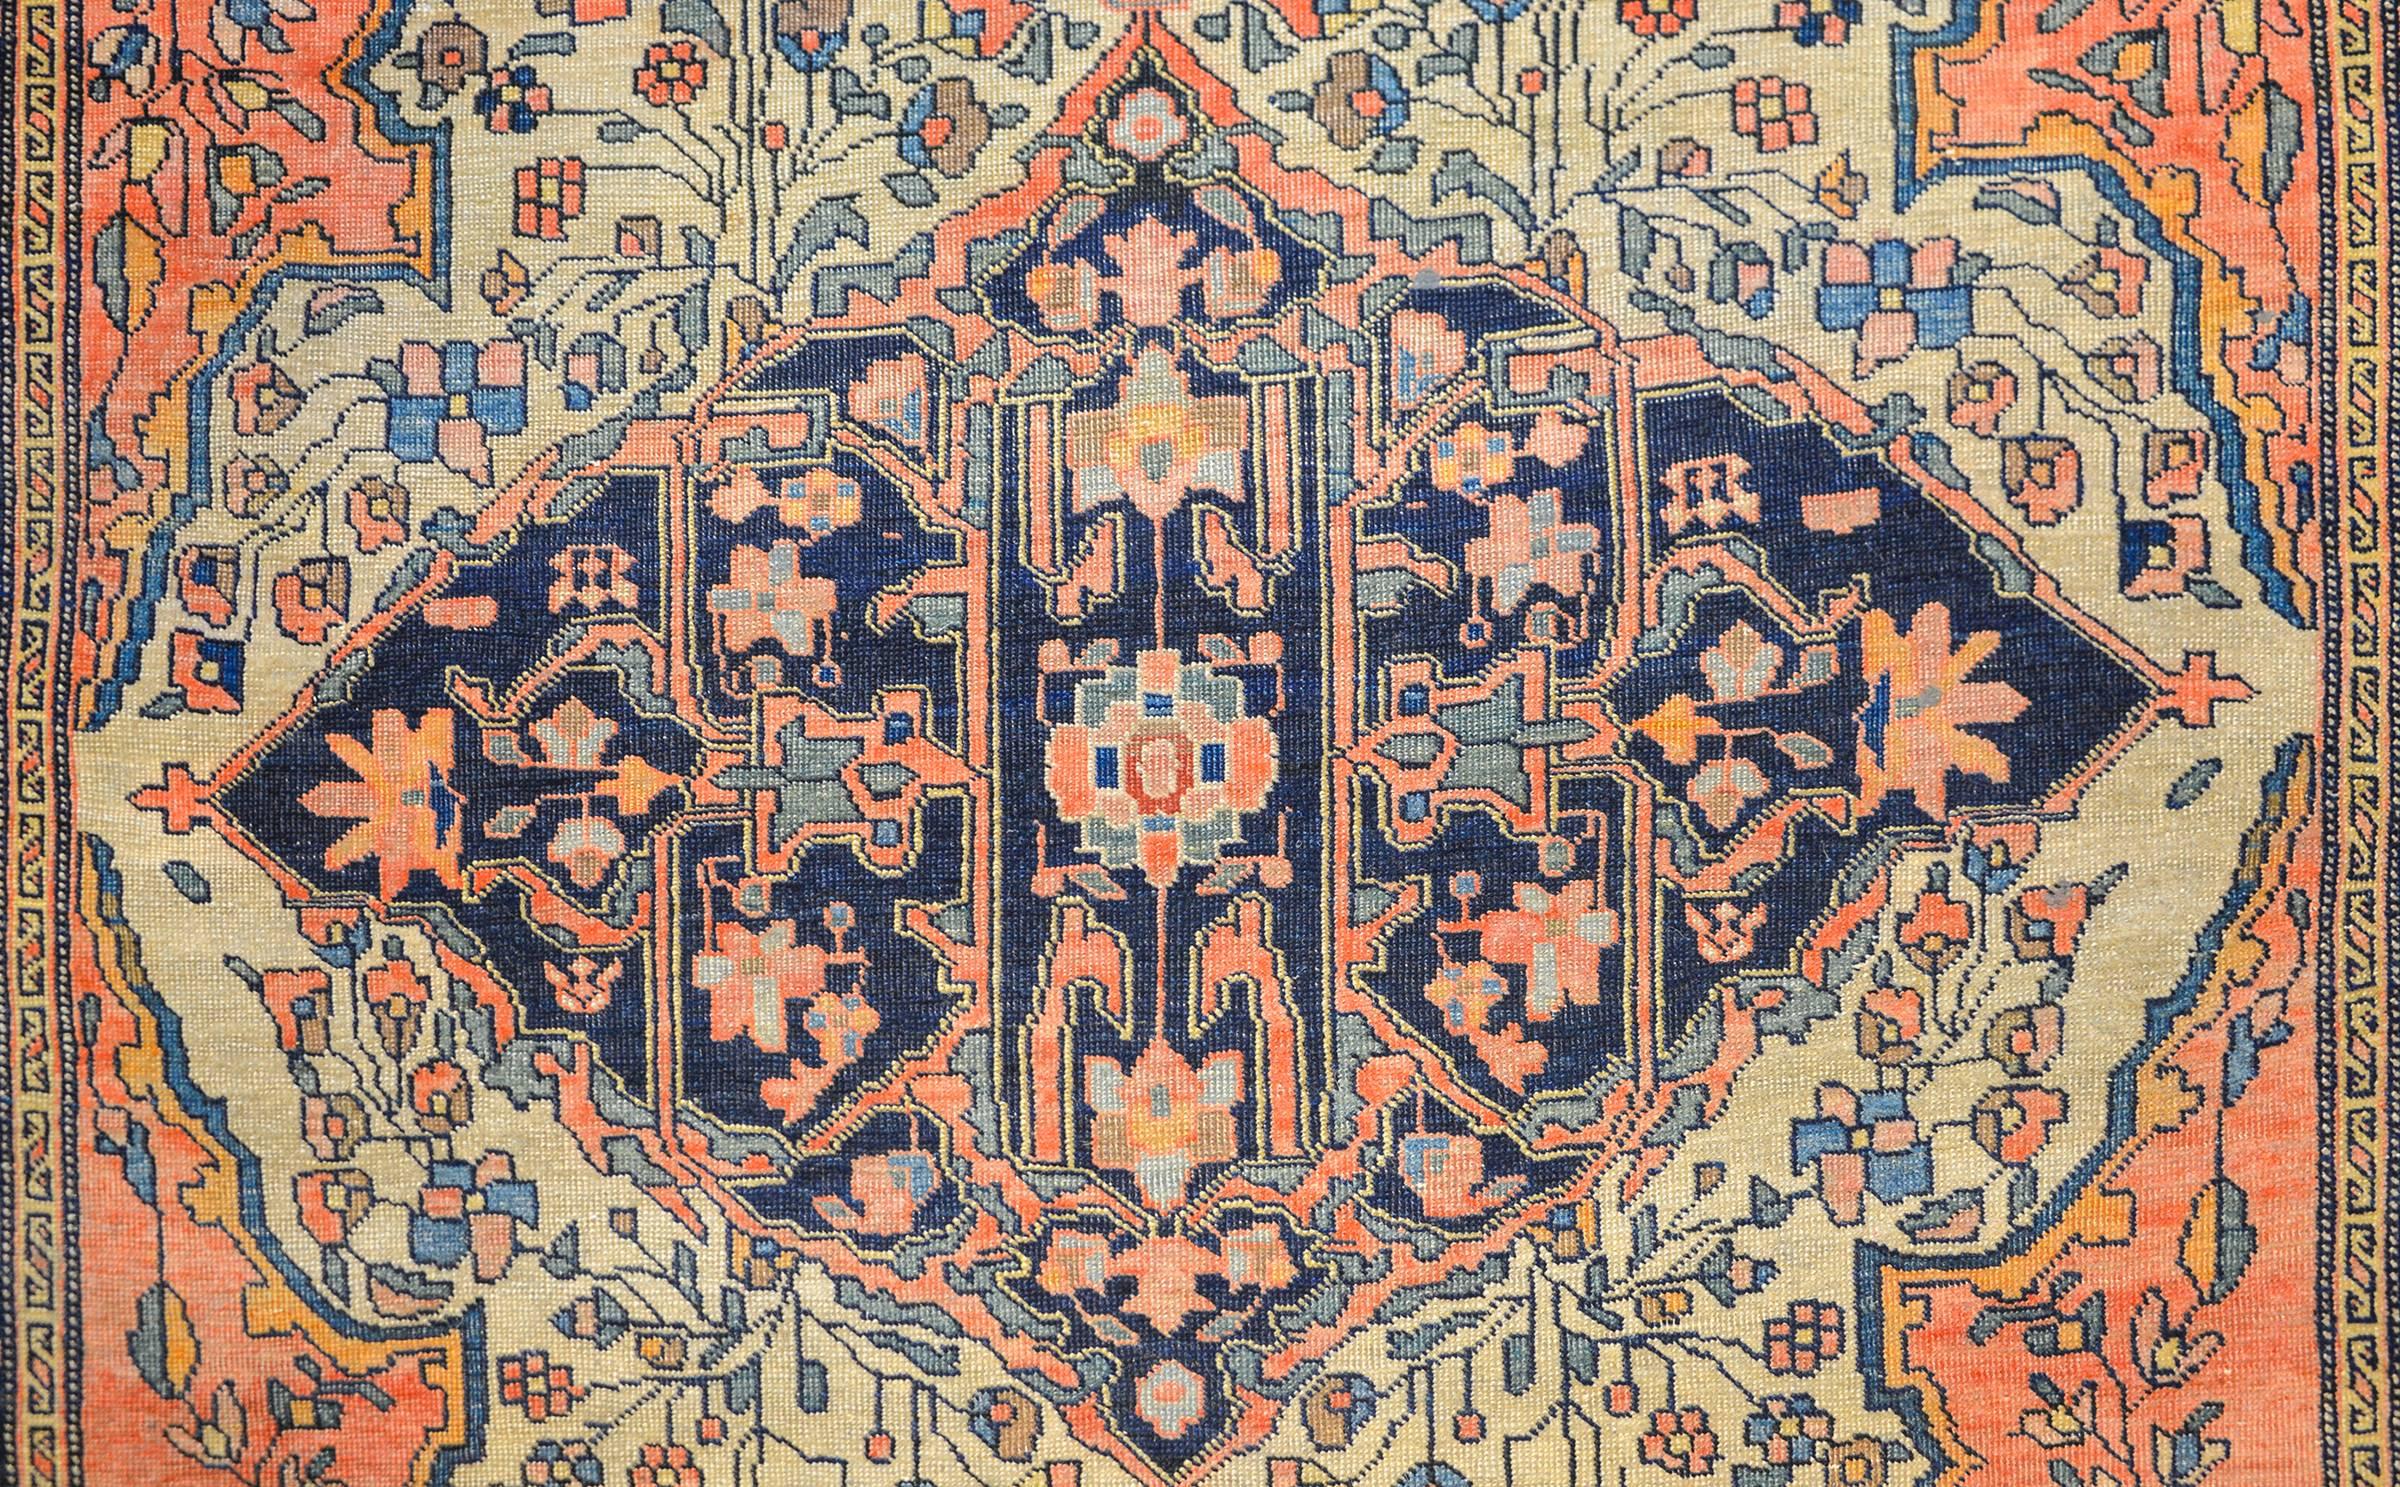 A wonderful late 19th century Persian Sarouk Farahan rug with an expertly rendered and densely woven pattern of intertwining vines, leaves, and flowers woven in beautiful indigo, salmon, and gold vegetable dyed wool. The border is sweet, with a